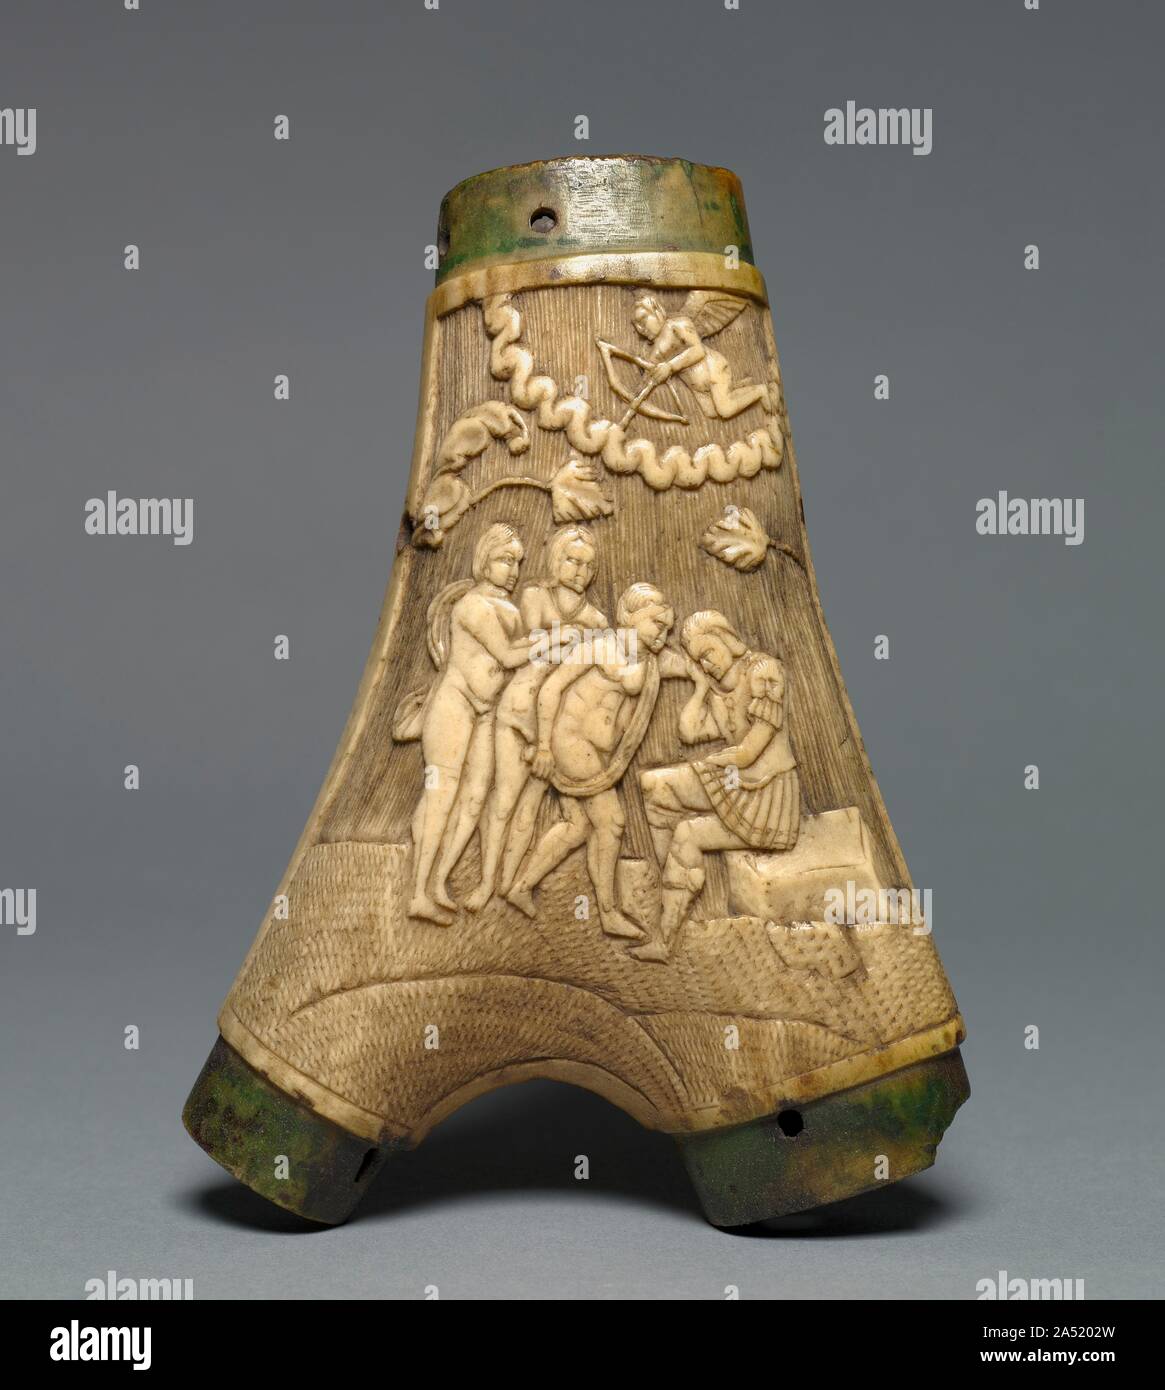 Powder Flask, c. 1550-1580. Powder flasks are small, portable containers designed to hold gunpowder. From the 1400s to the 1800s, powder flasks were indispensable for charging and priming firearms of all types. Without powder flasks firearms were of little use to their owners. Many highly decorated flasks rank as works of art. During the 1500s, they were frequently decorated with images of famous historical figures. Here the figures of the Judgment of Paris come from Greek antiquity. Stock Photo